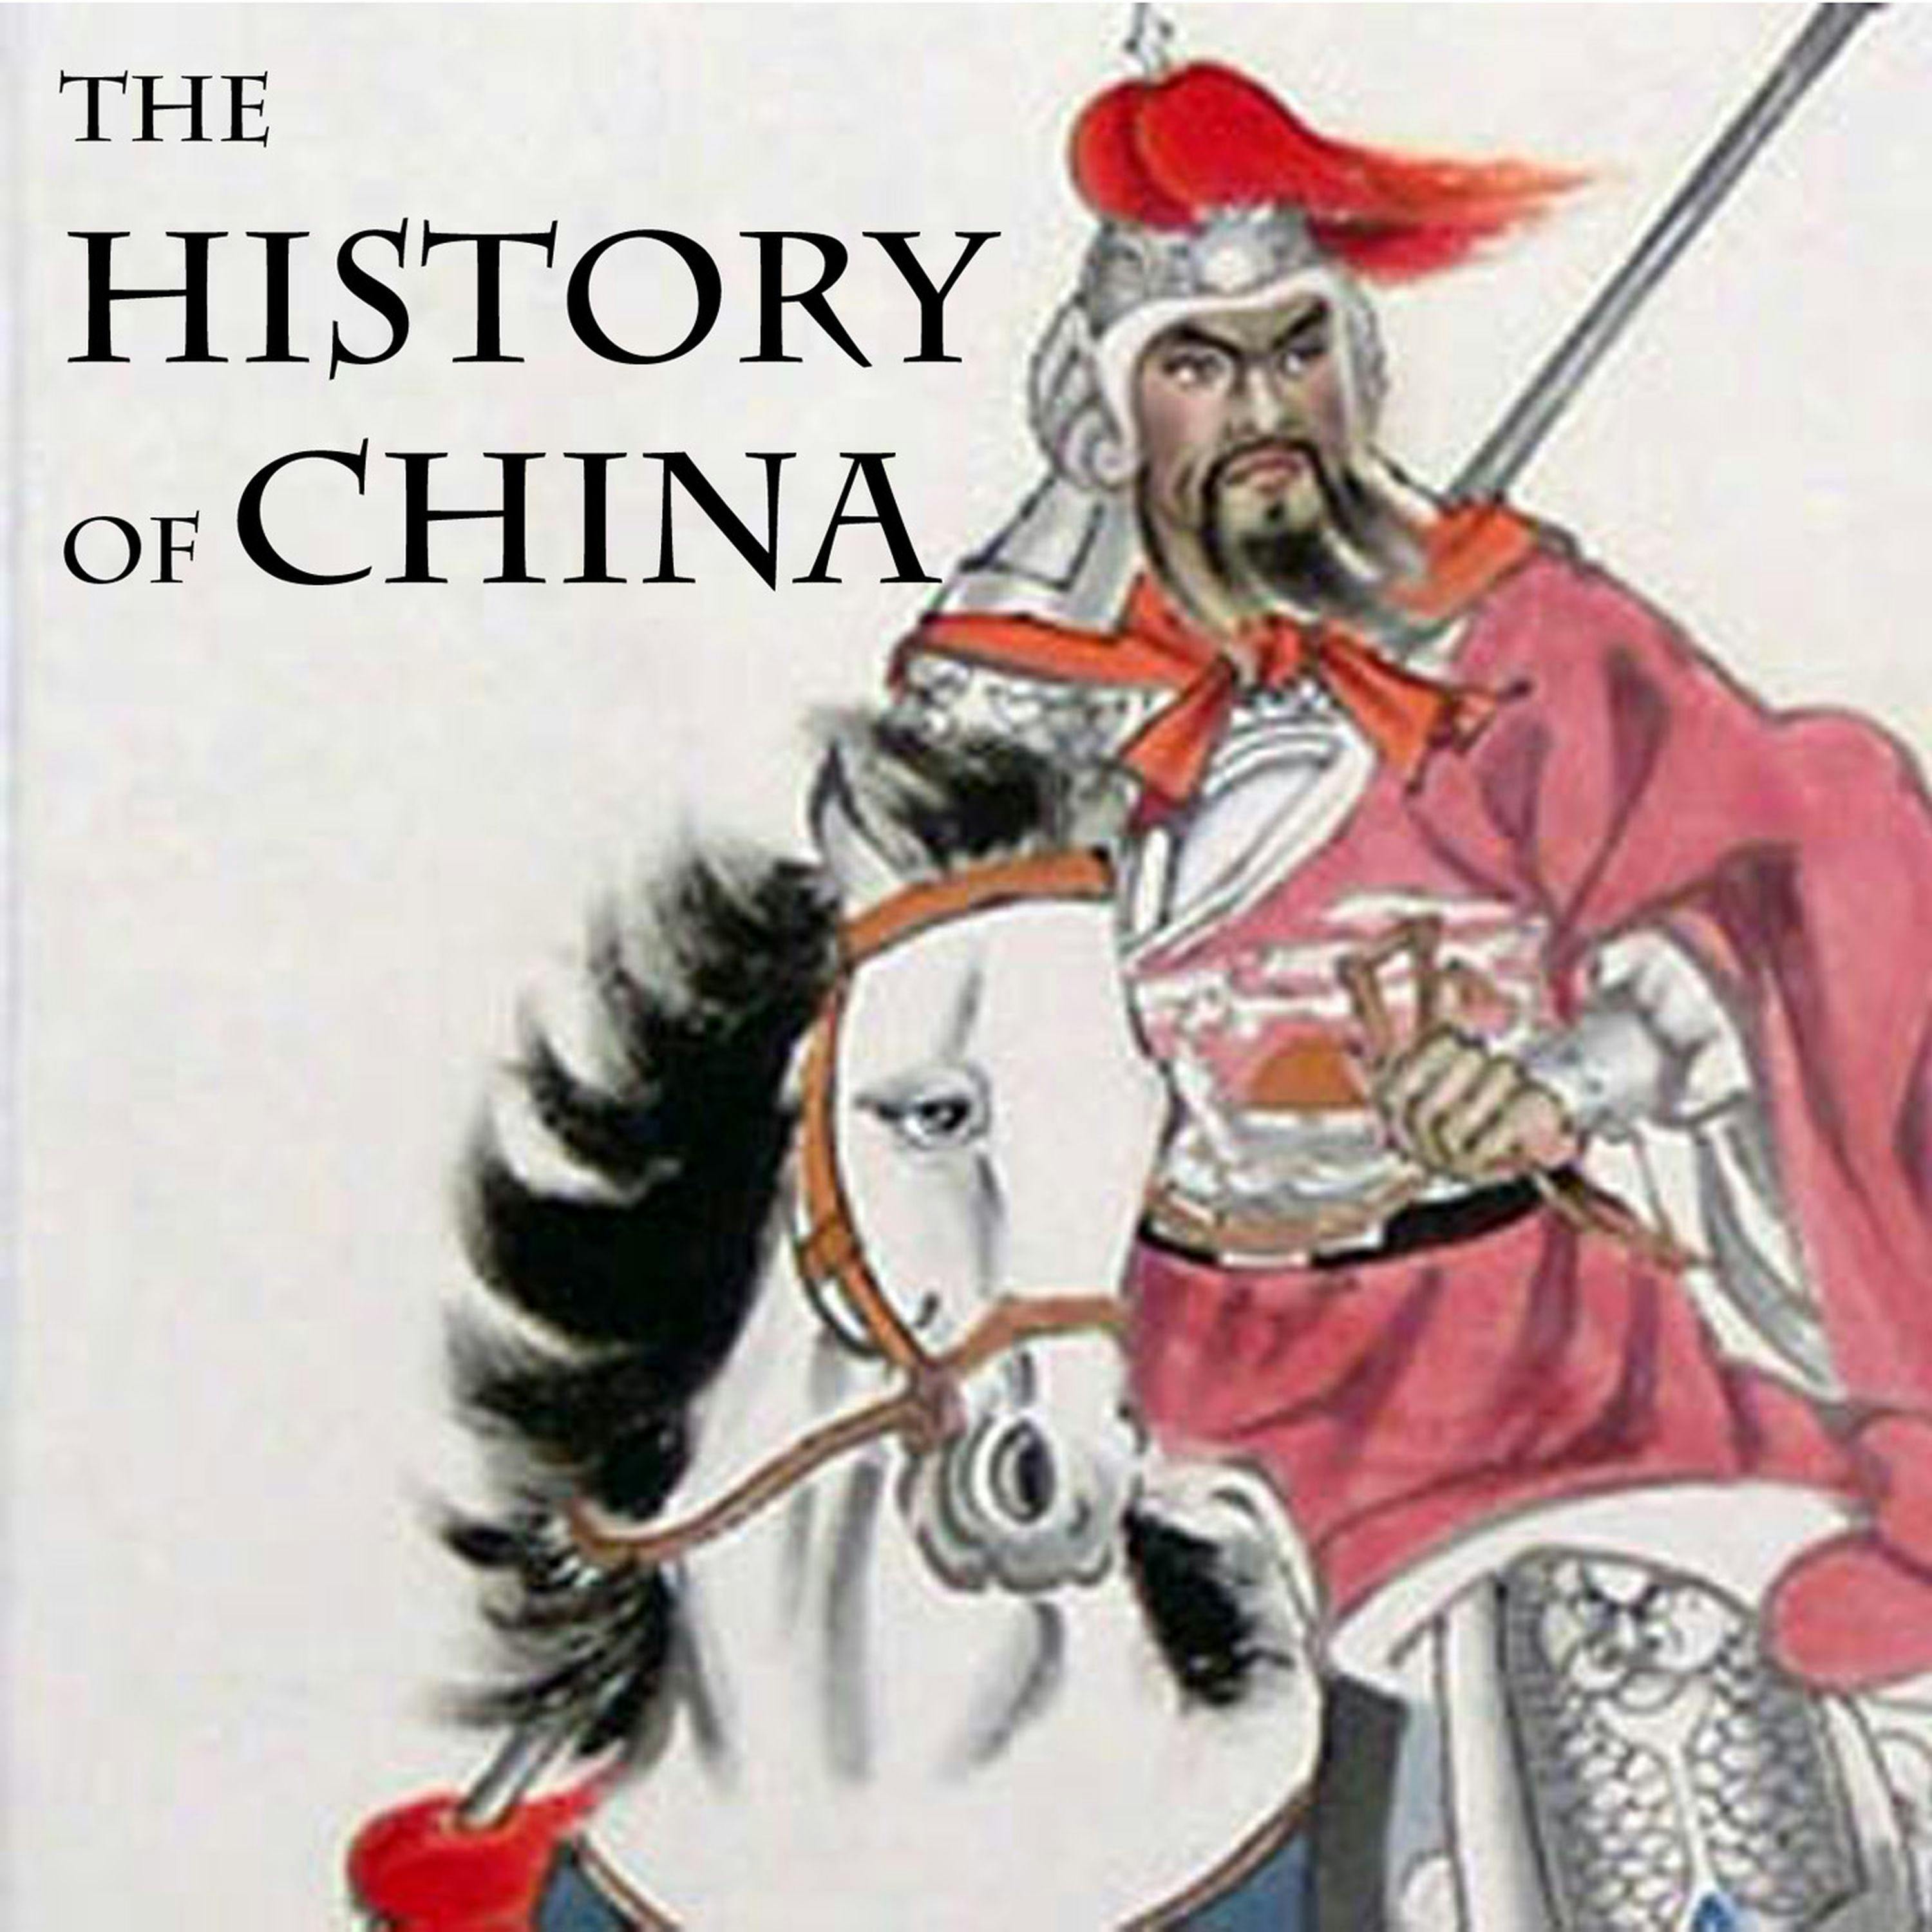 #3 - Xia 1: The Xia, China's First Dynasty